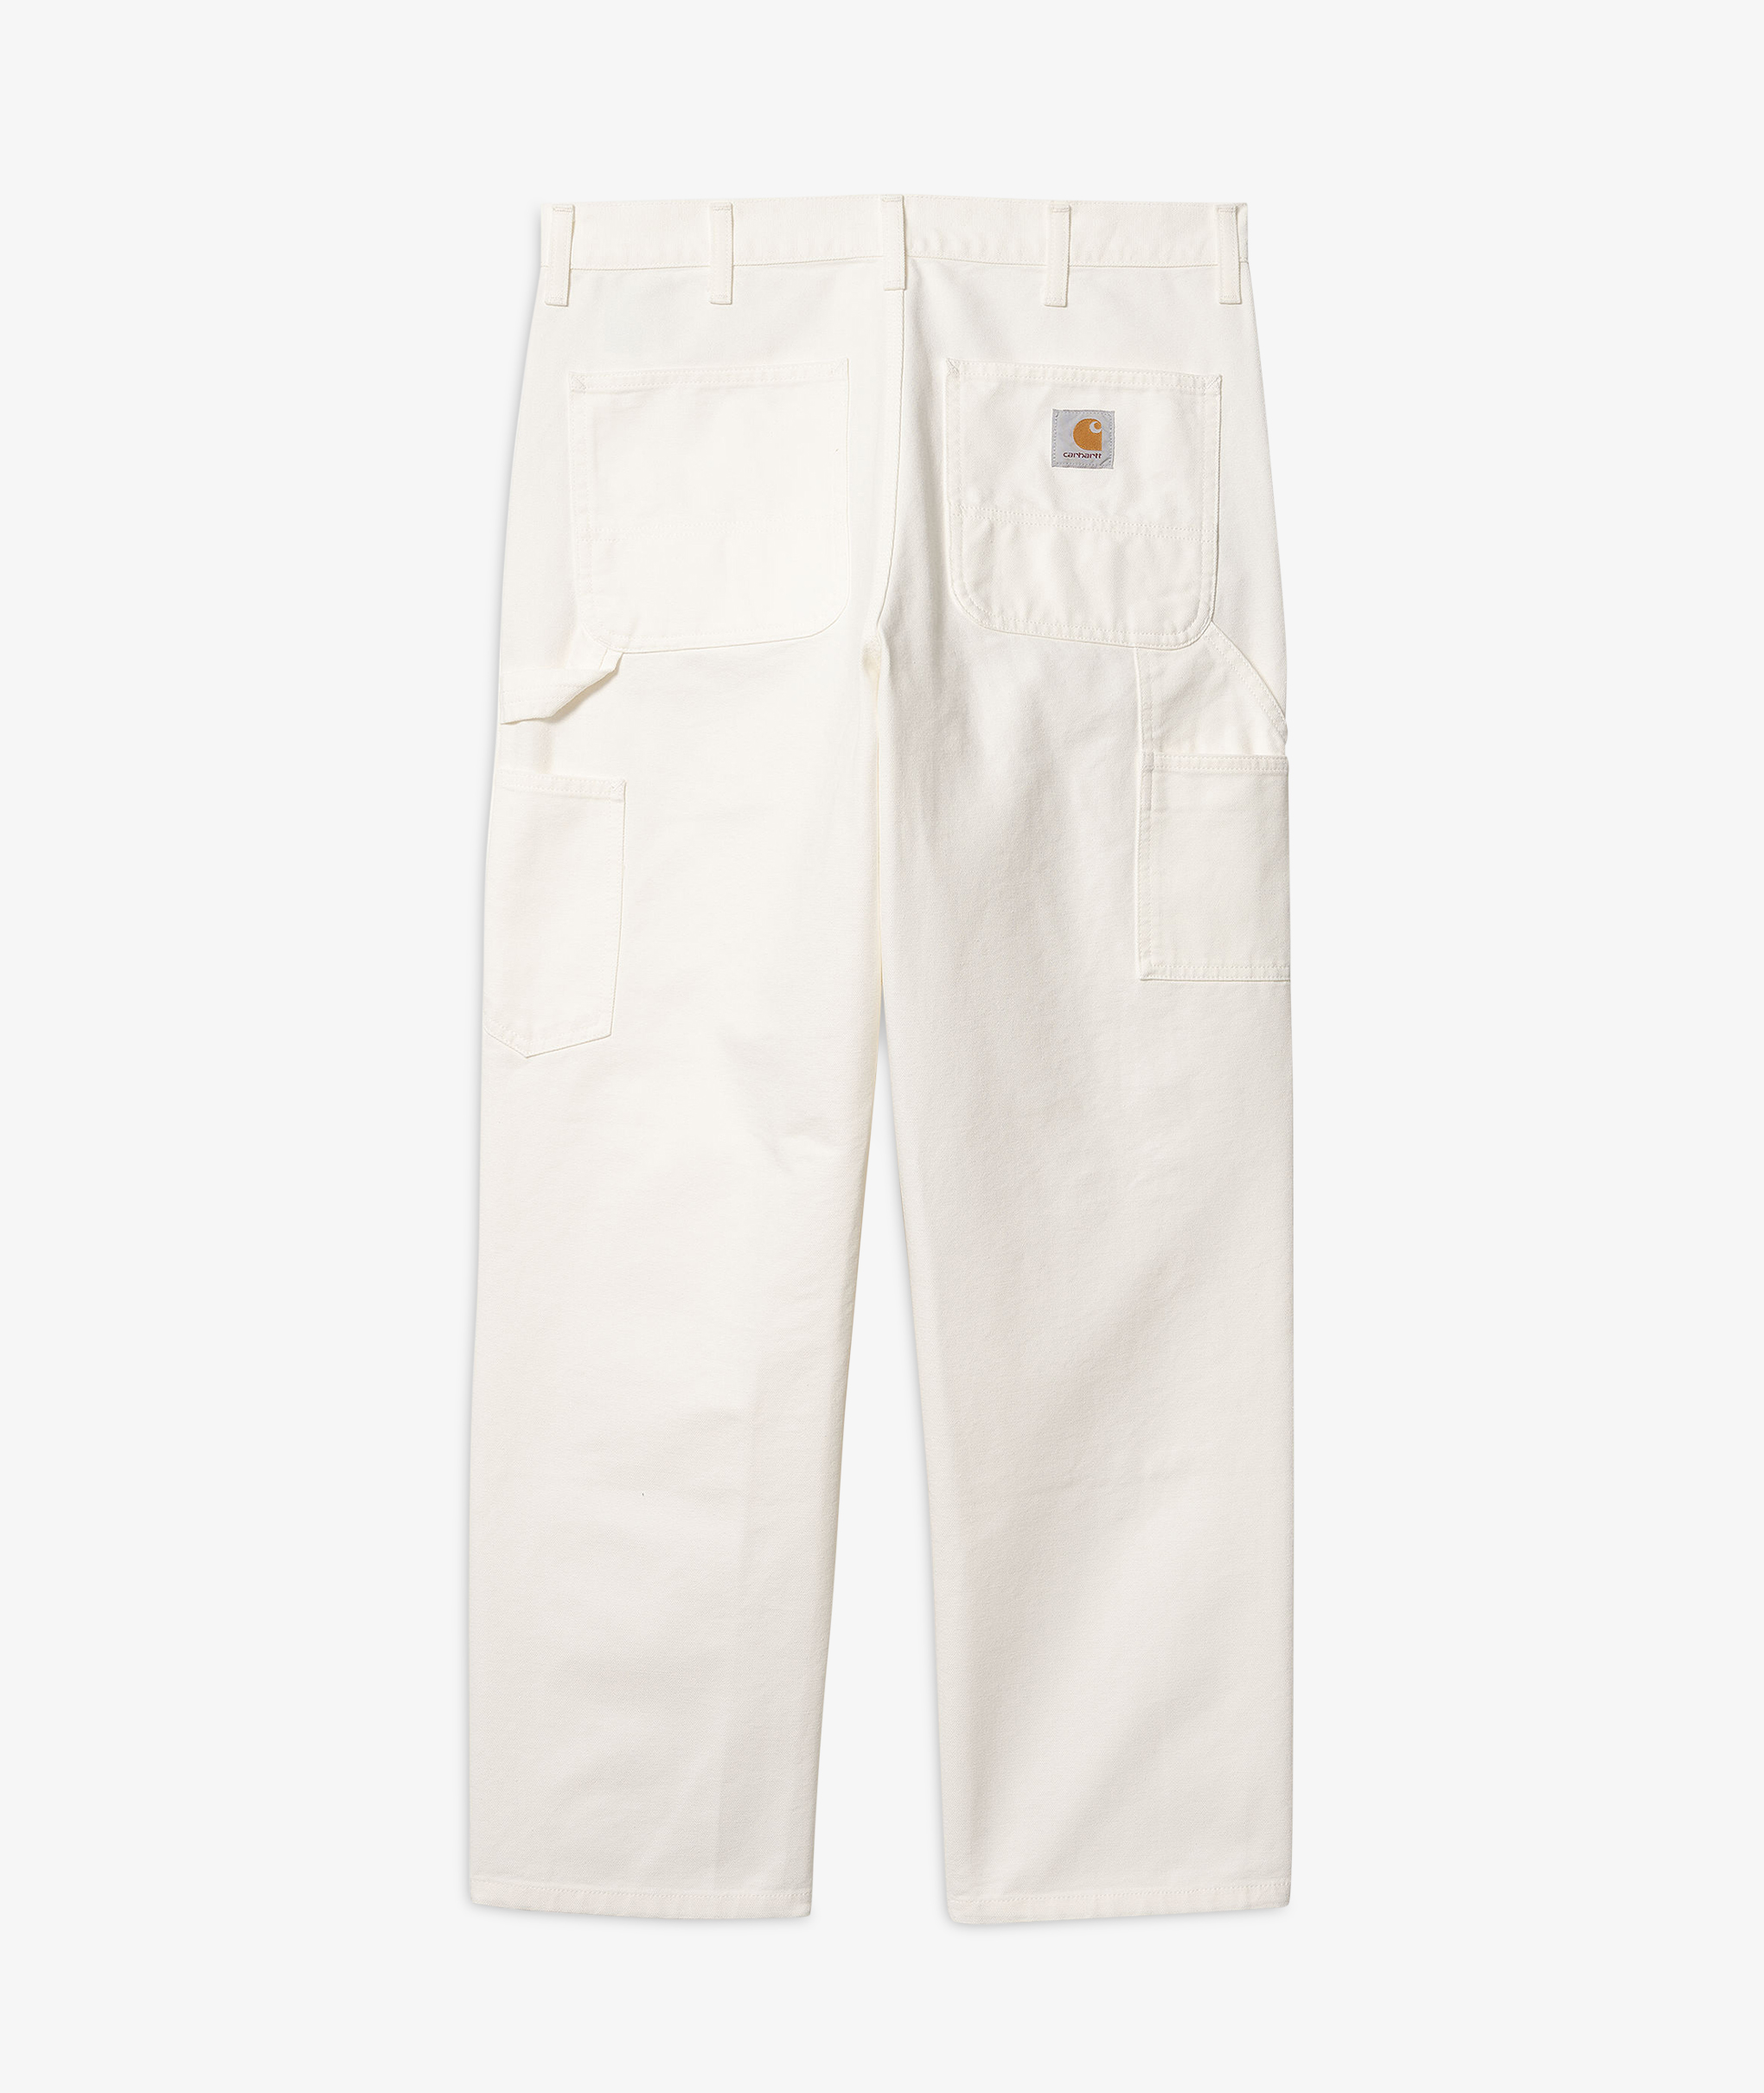 Norse Store  Shipping Worldwide - Carhartt WIP Double Knee Pant - Wax  Rinsed